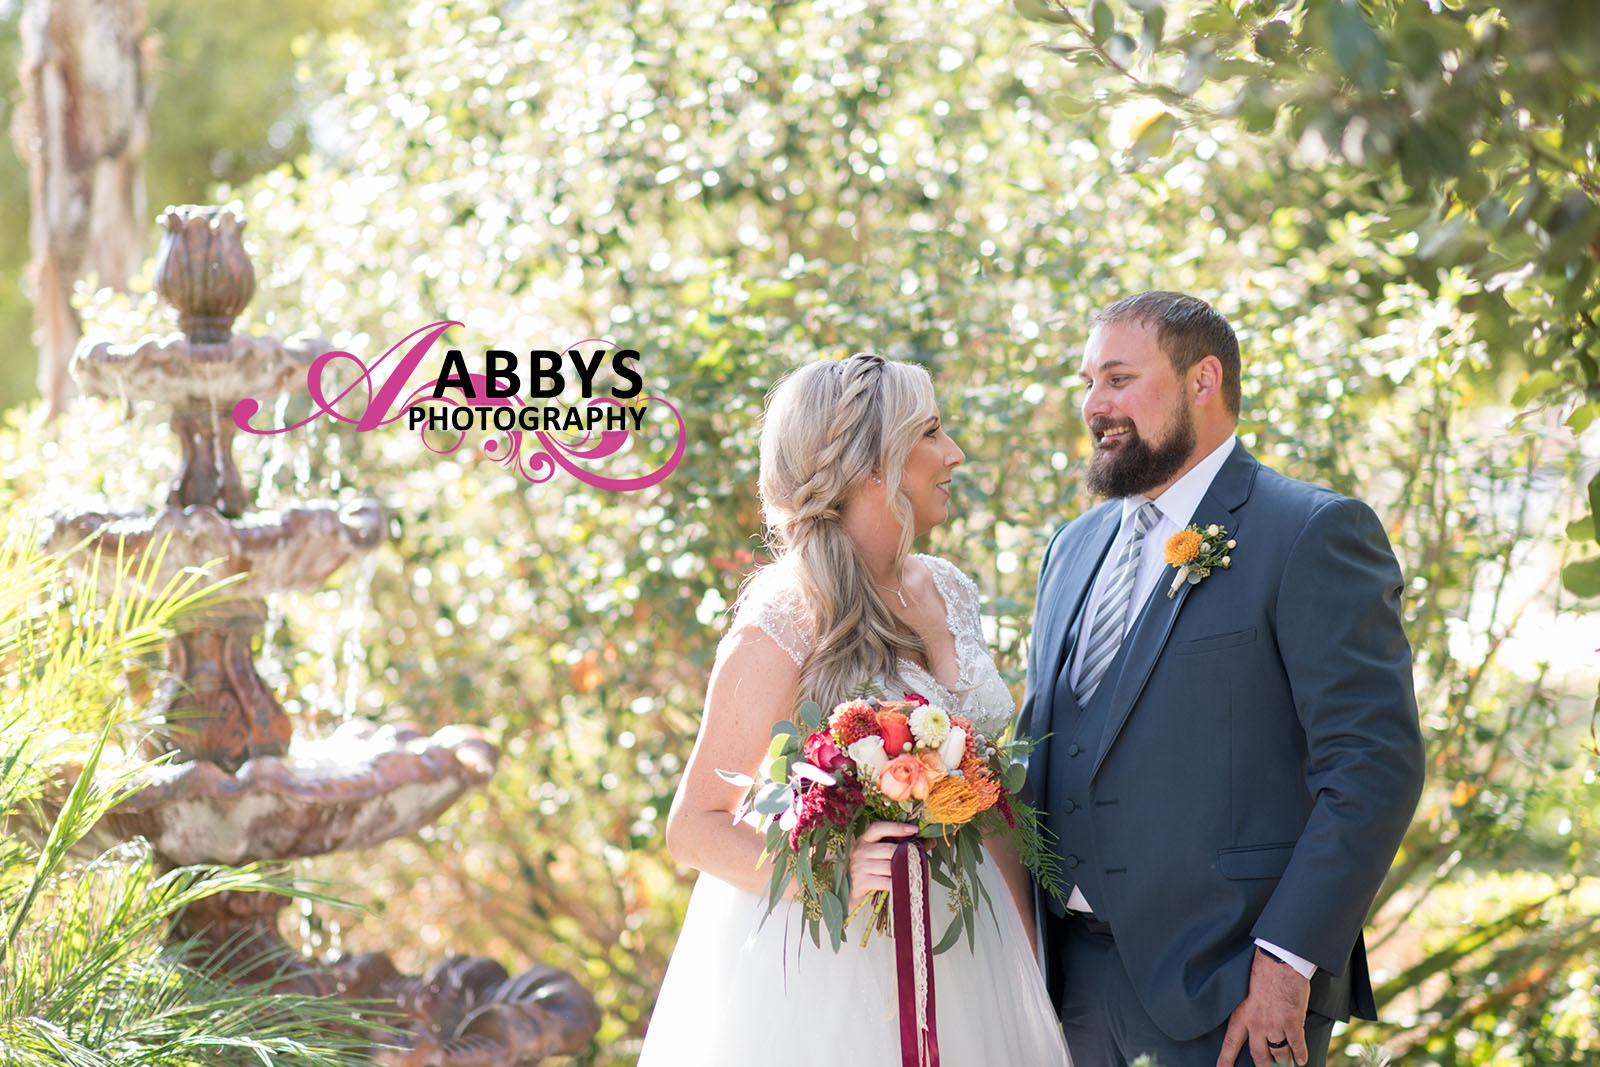 A wedding isn't a wedding without the right photography, and Abbys Photography is right for you. Call 661-342-4945